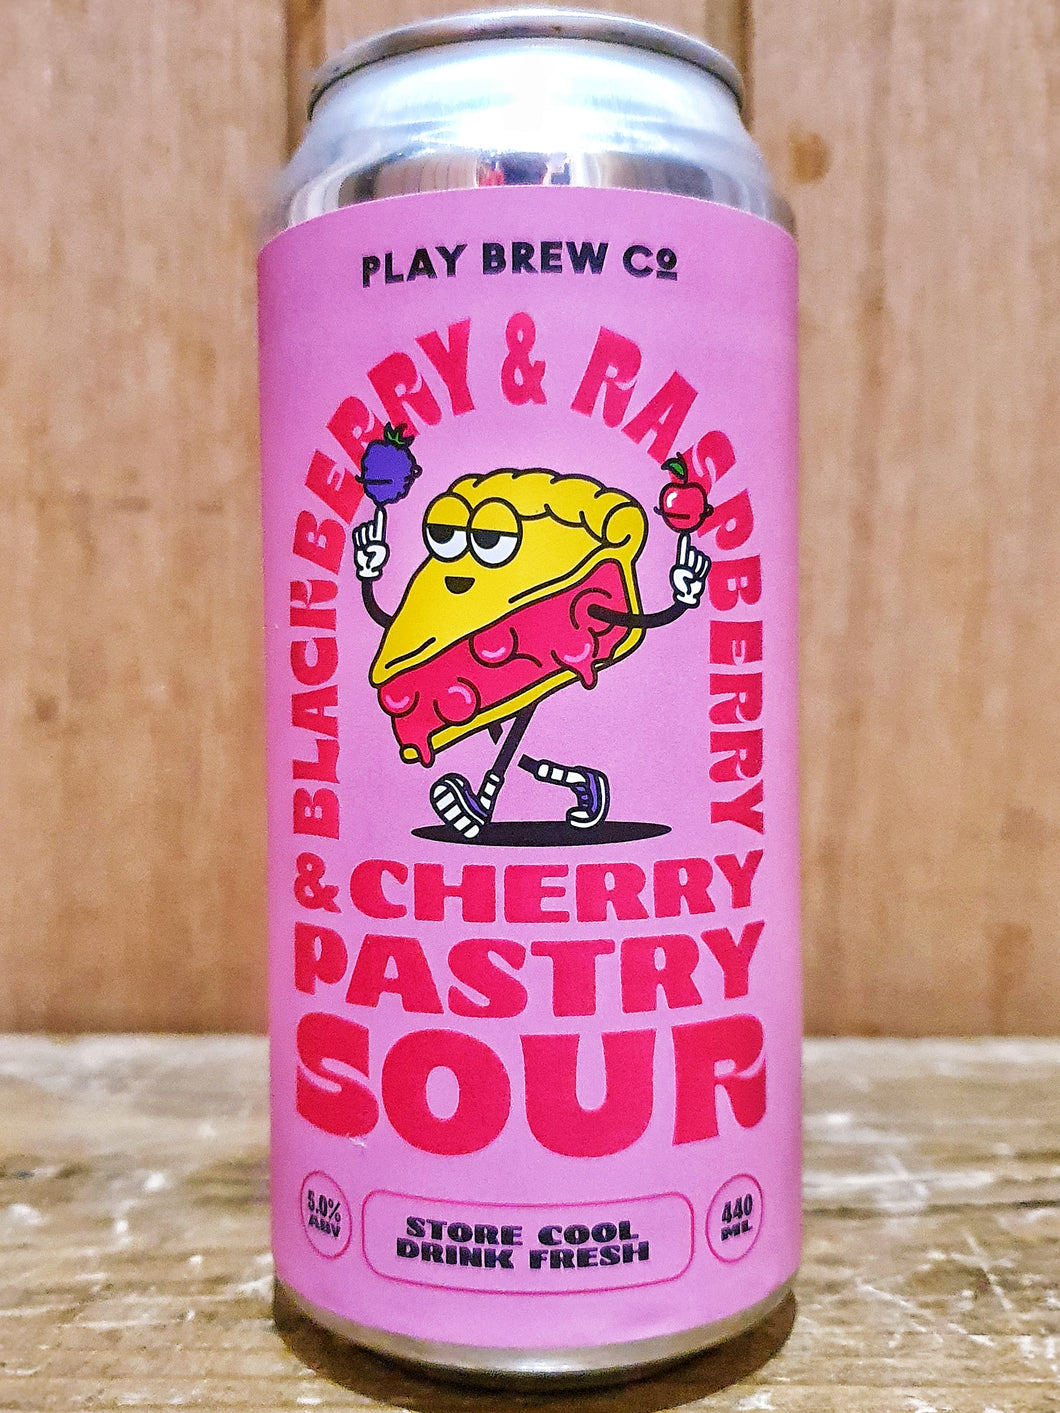 Play Brew - Blackberry and Raspberry and Cherry Pastry Sour